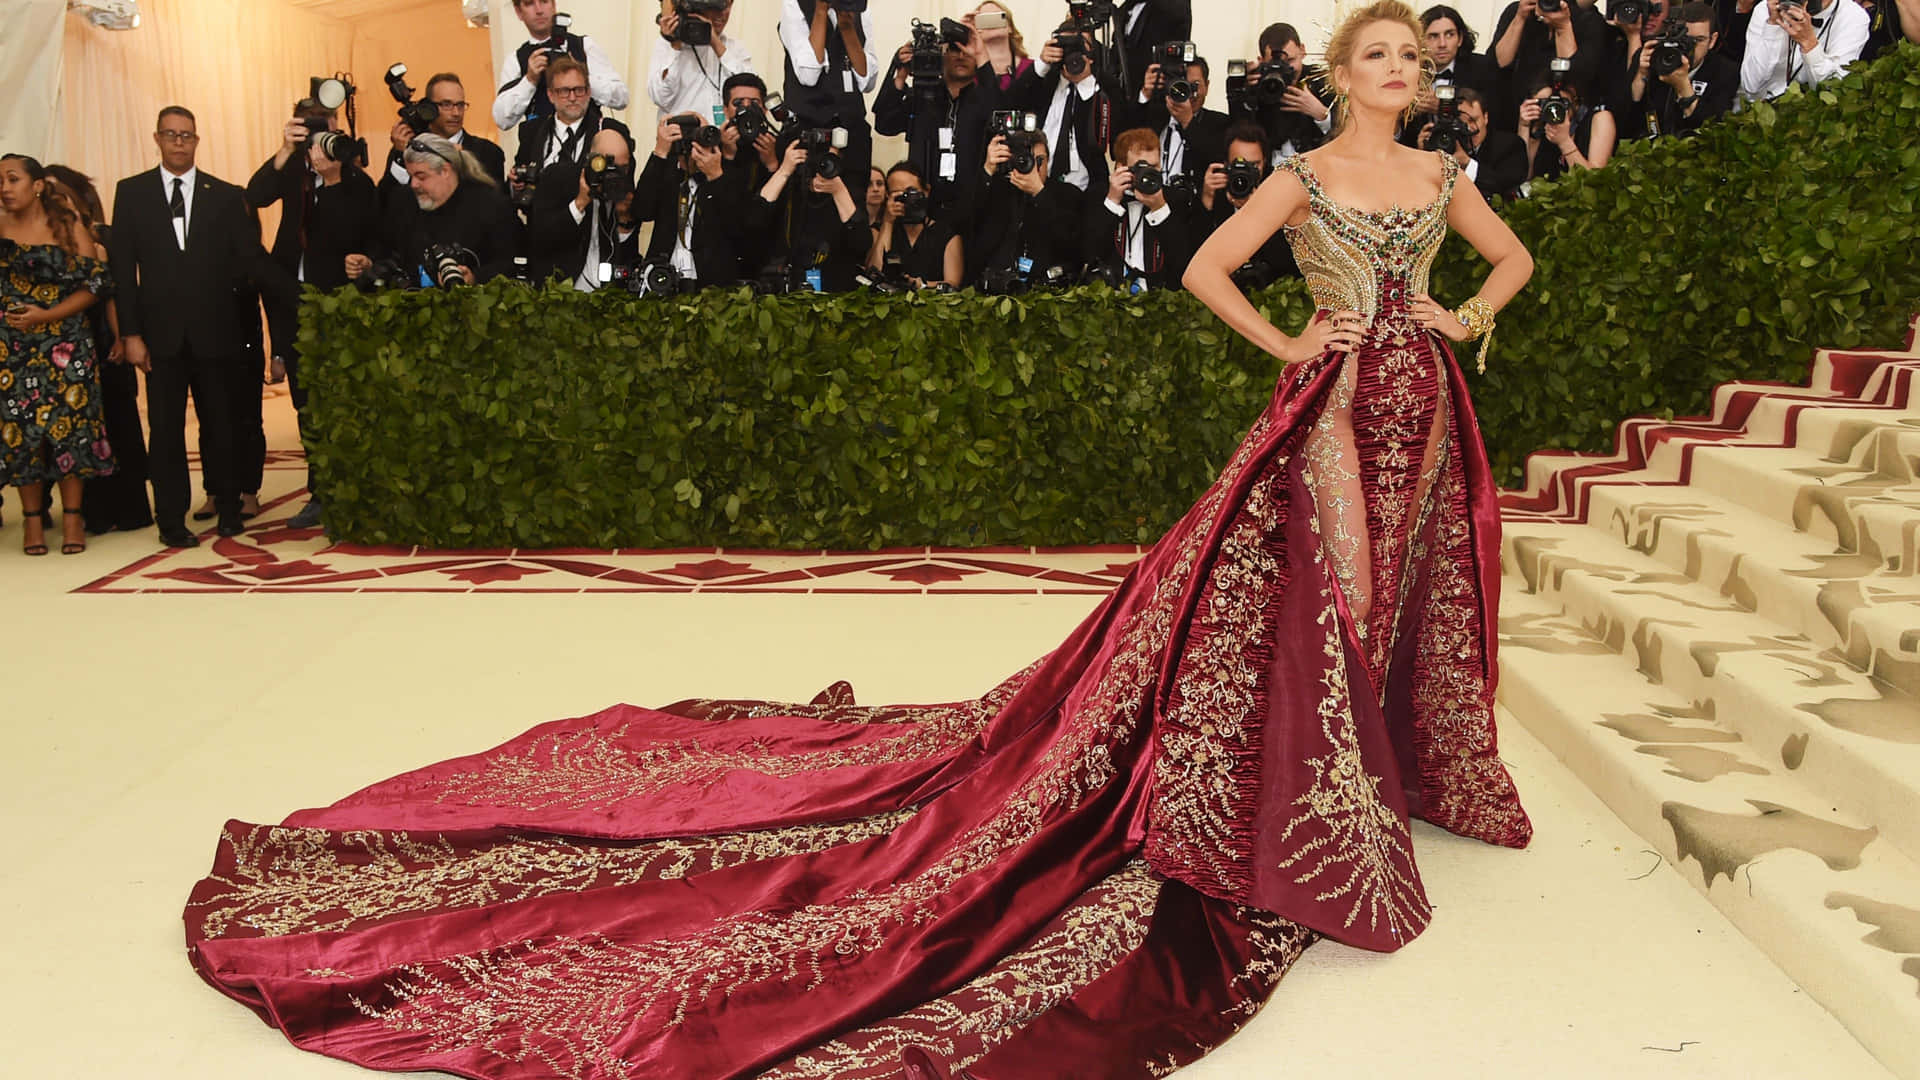 Captivating Moments at the Met Gala: Fashion Icons Illuminate the Red Carpet